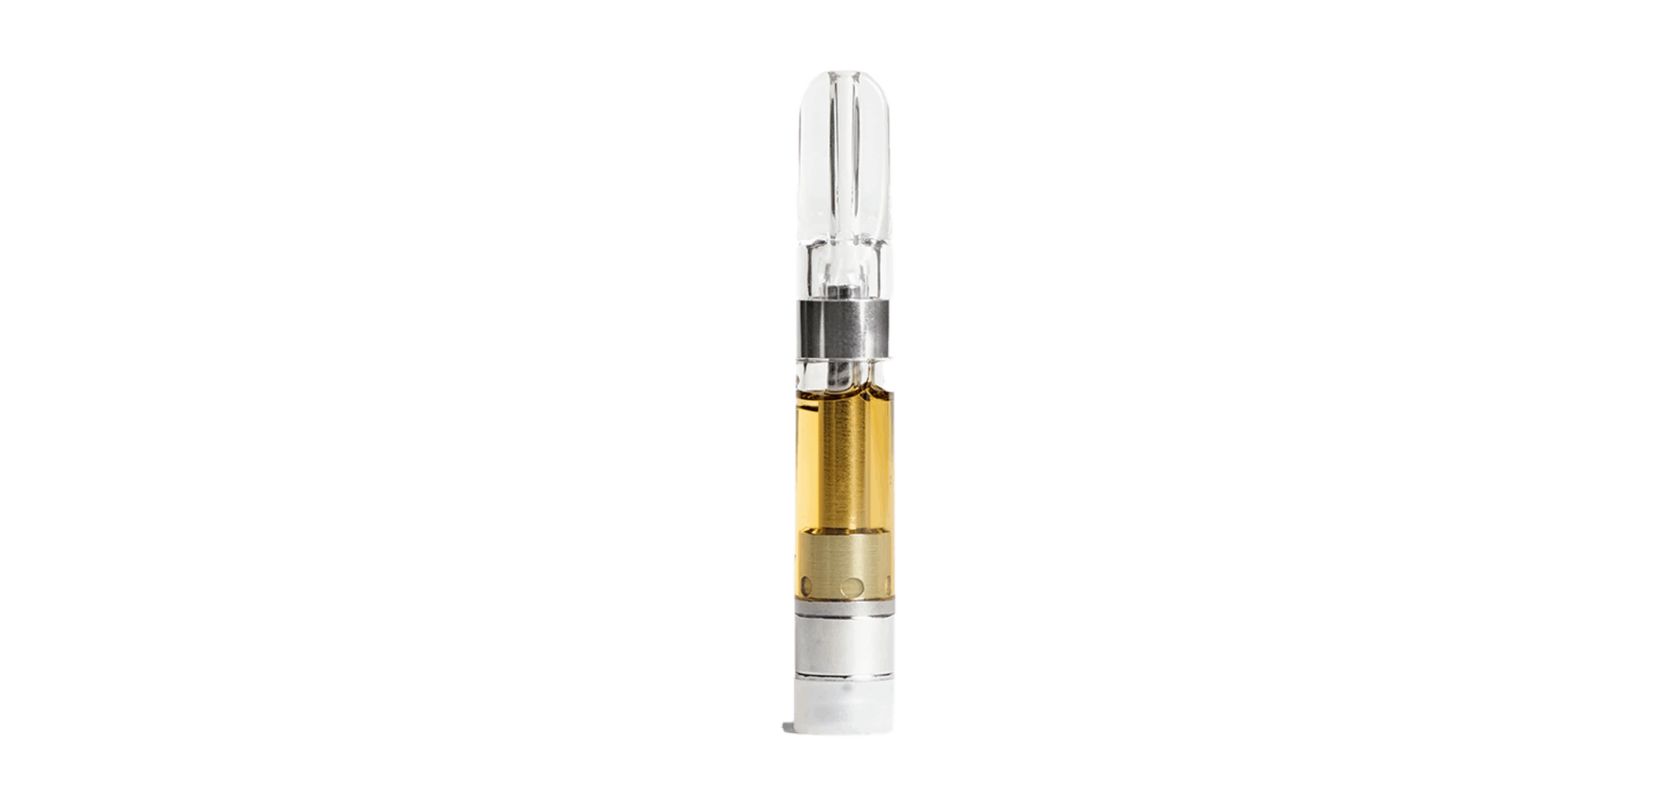 A THC oil cartridge is a small container filled with concentrated THC oil. THC (tetrahydrocannabinol) is the main psychoactive compound found in cannabis plants. 